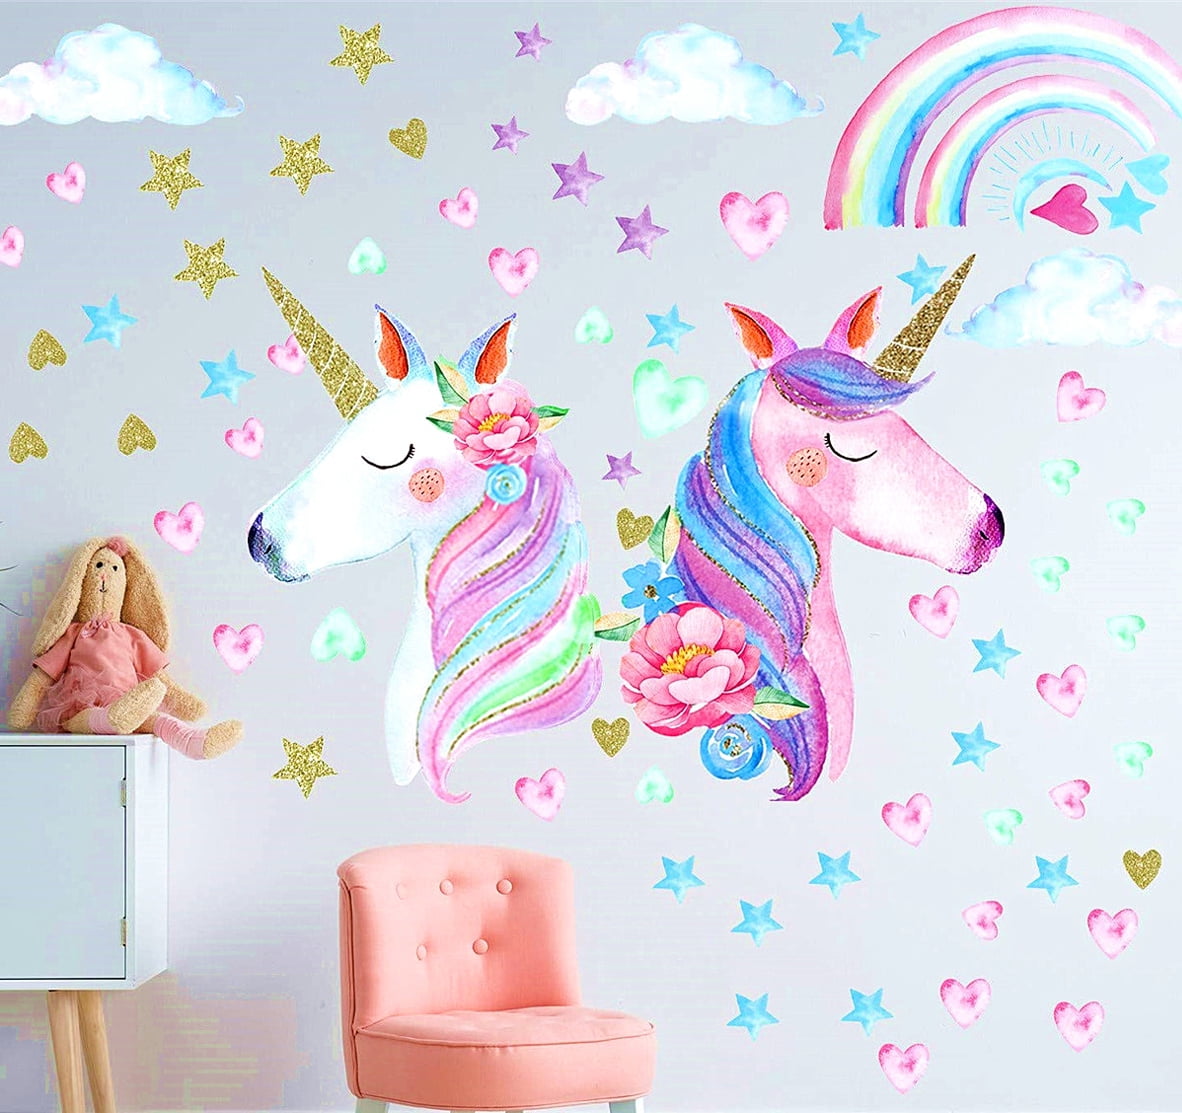 Unicorn Wall Decals for Girls Room 3 Sheets Unicorn Wall Rainbow Stickers Decor for Girls Kids Bedroom Nursery Christmas Birthday Party Decoration 